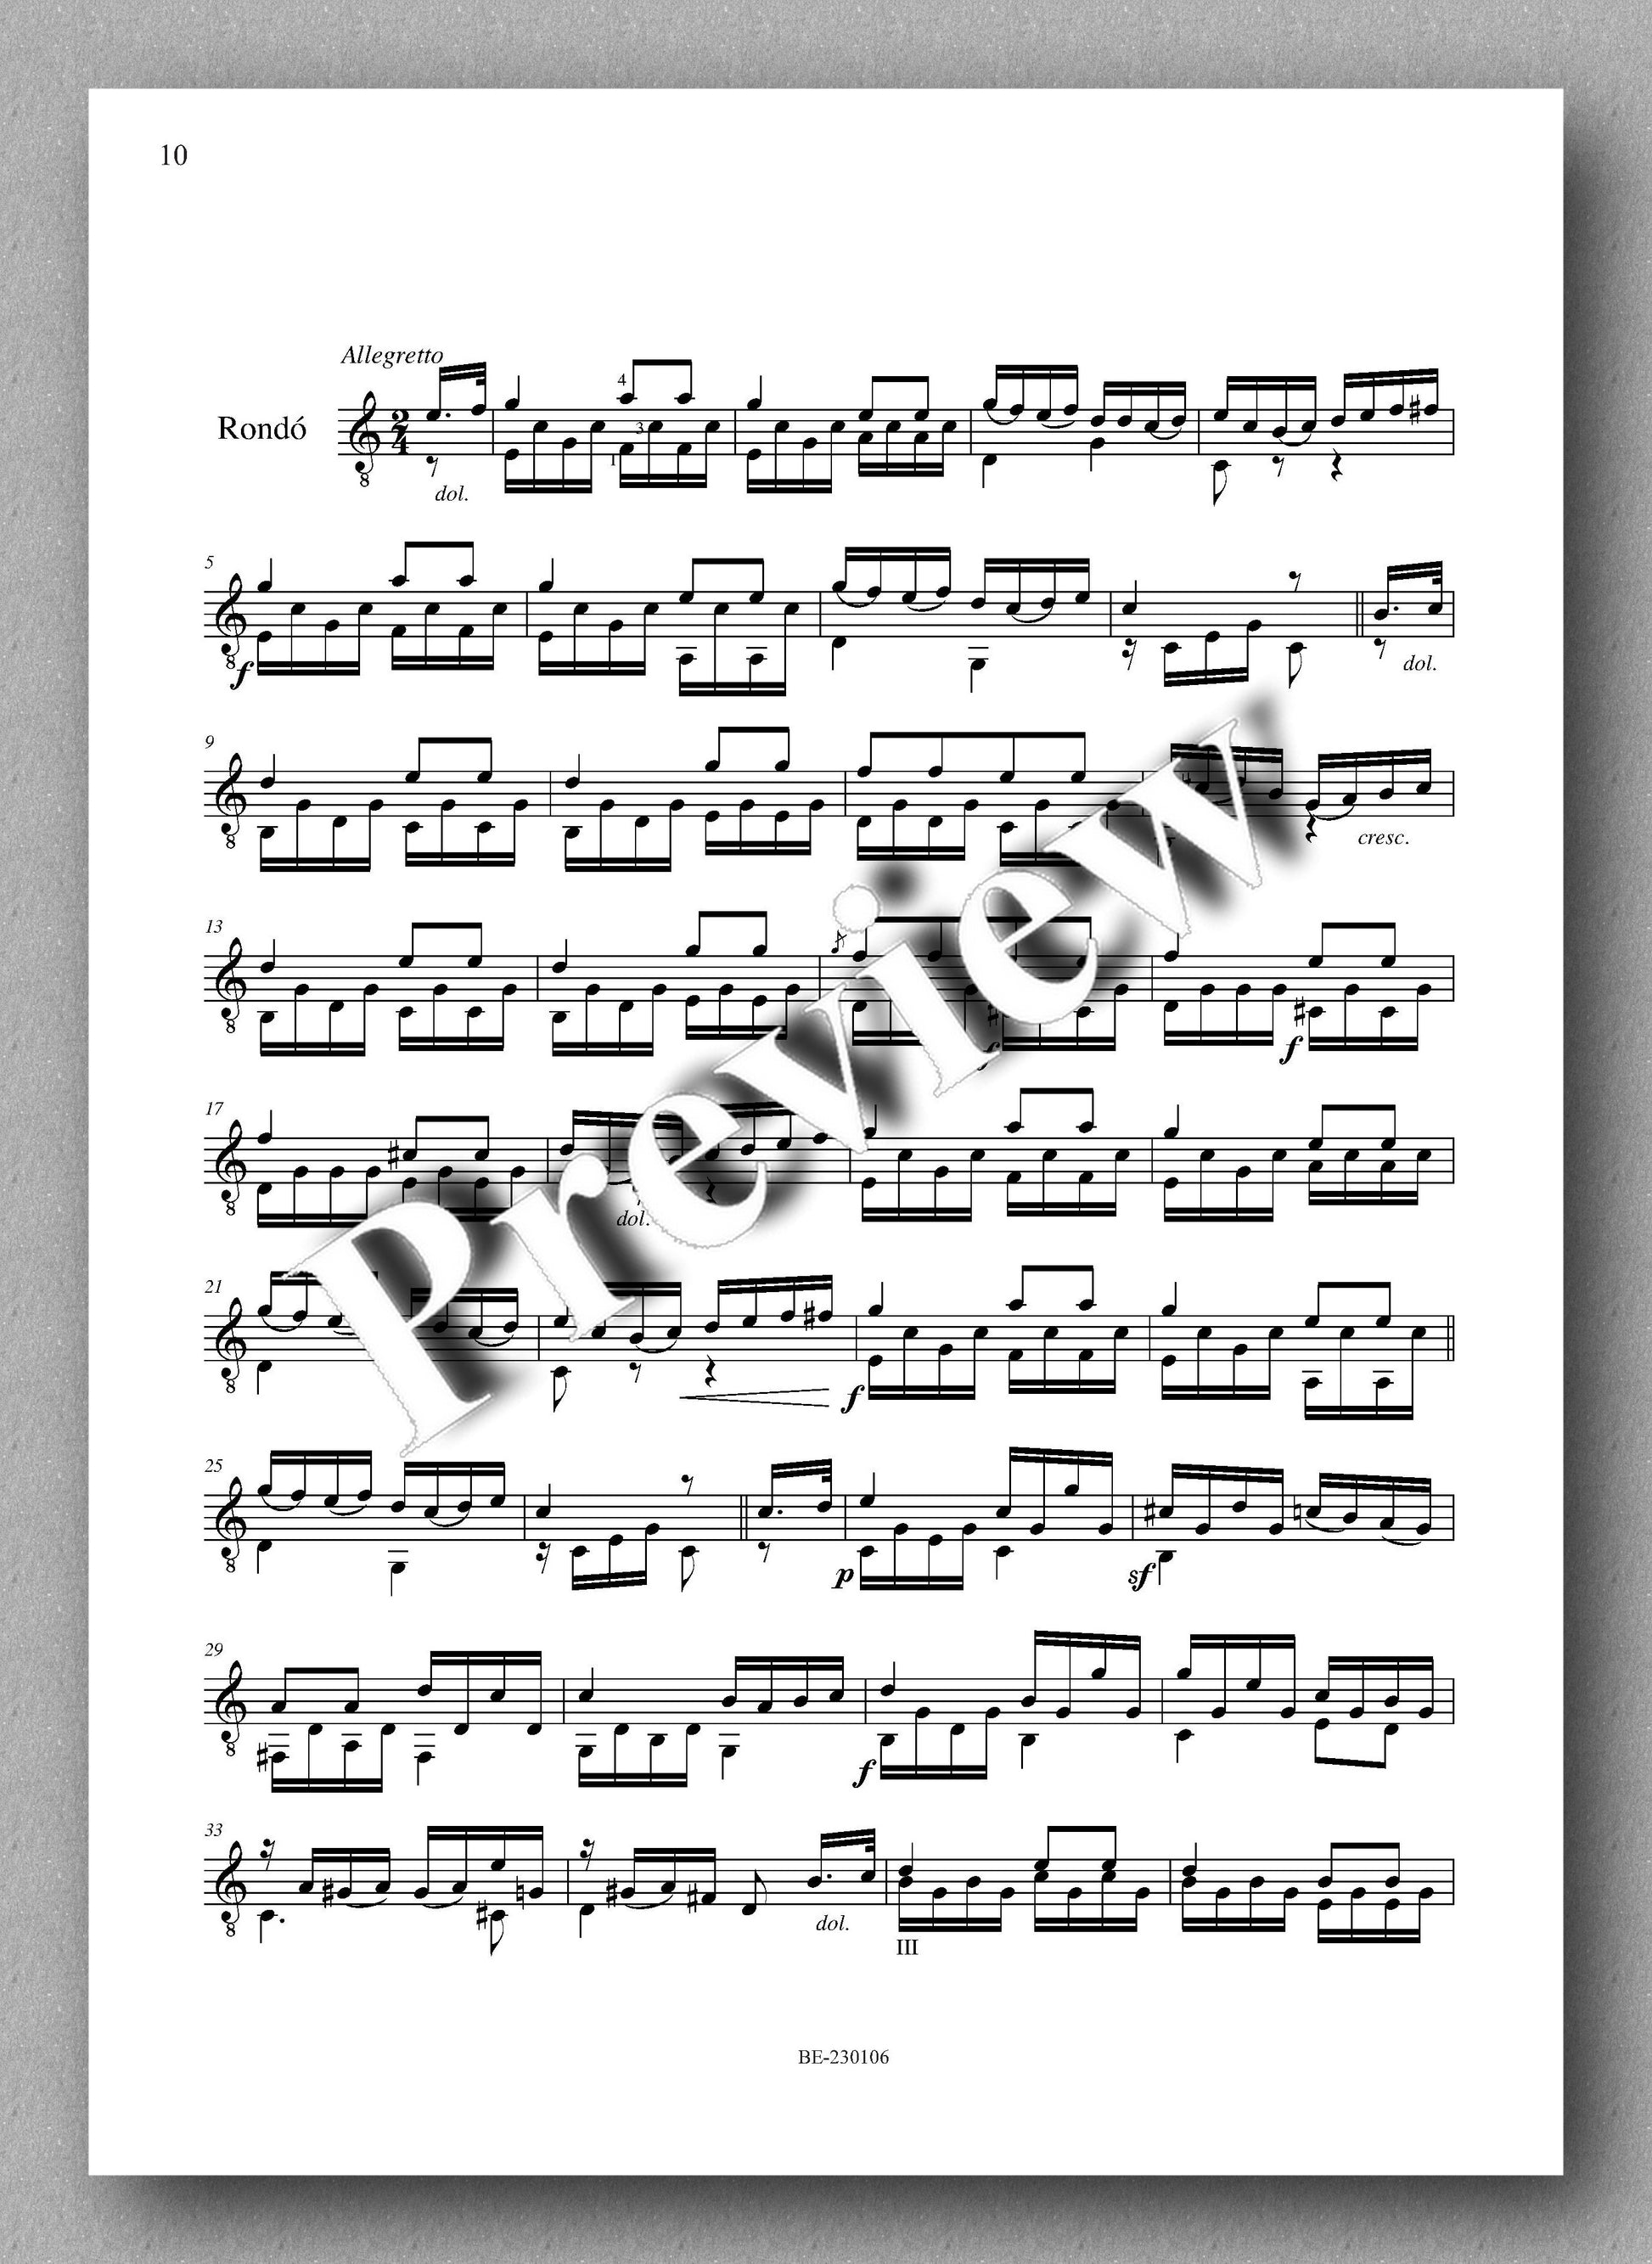 Molino, Collected Works for Guitar Solo, Vol. 18 - preview of the music score 2